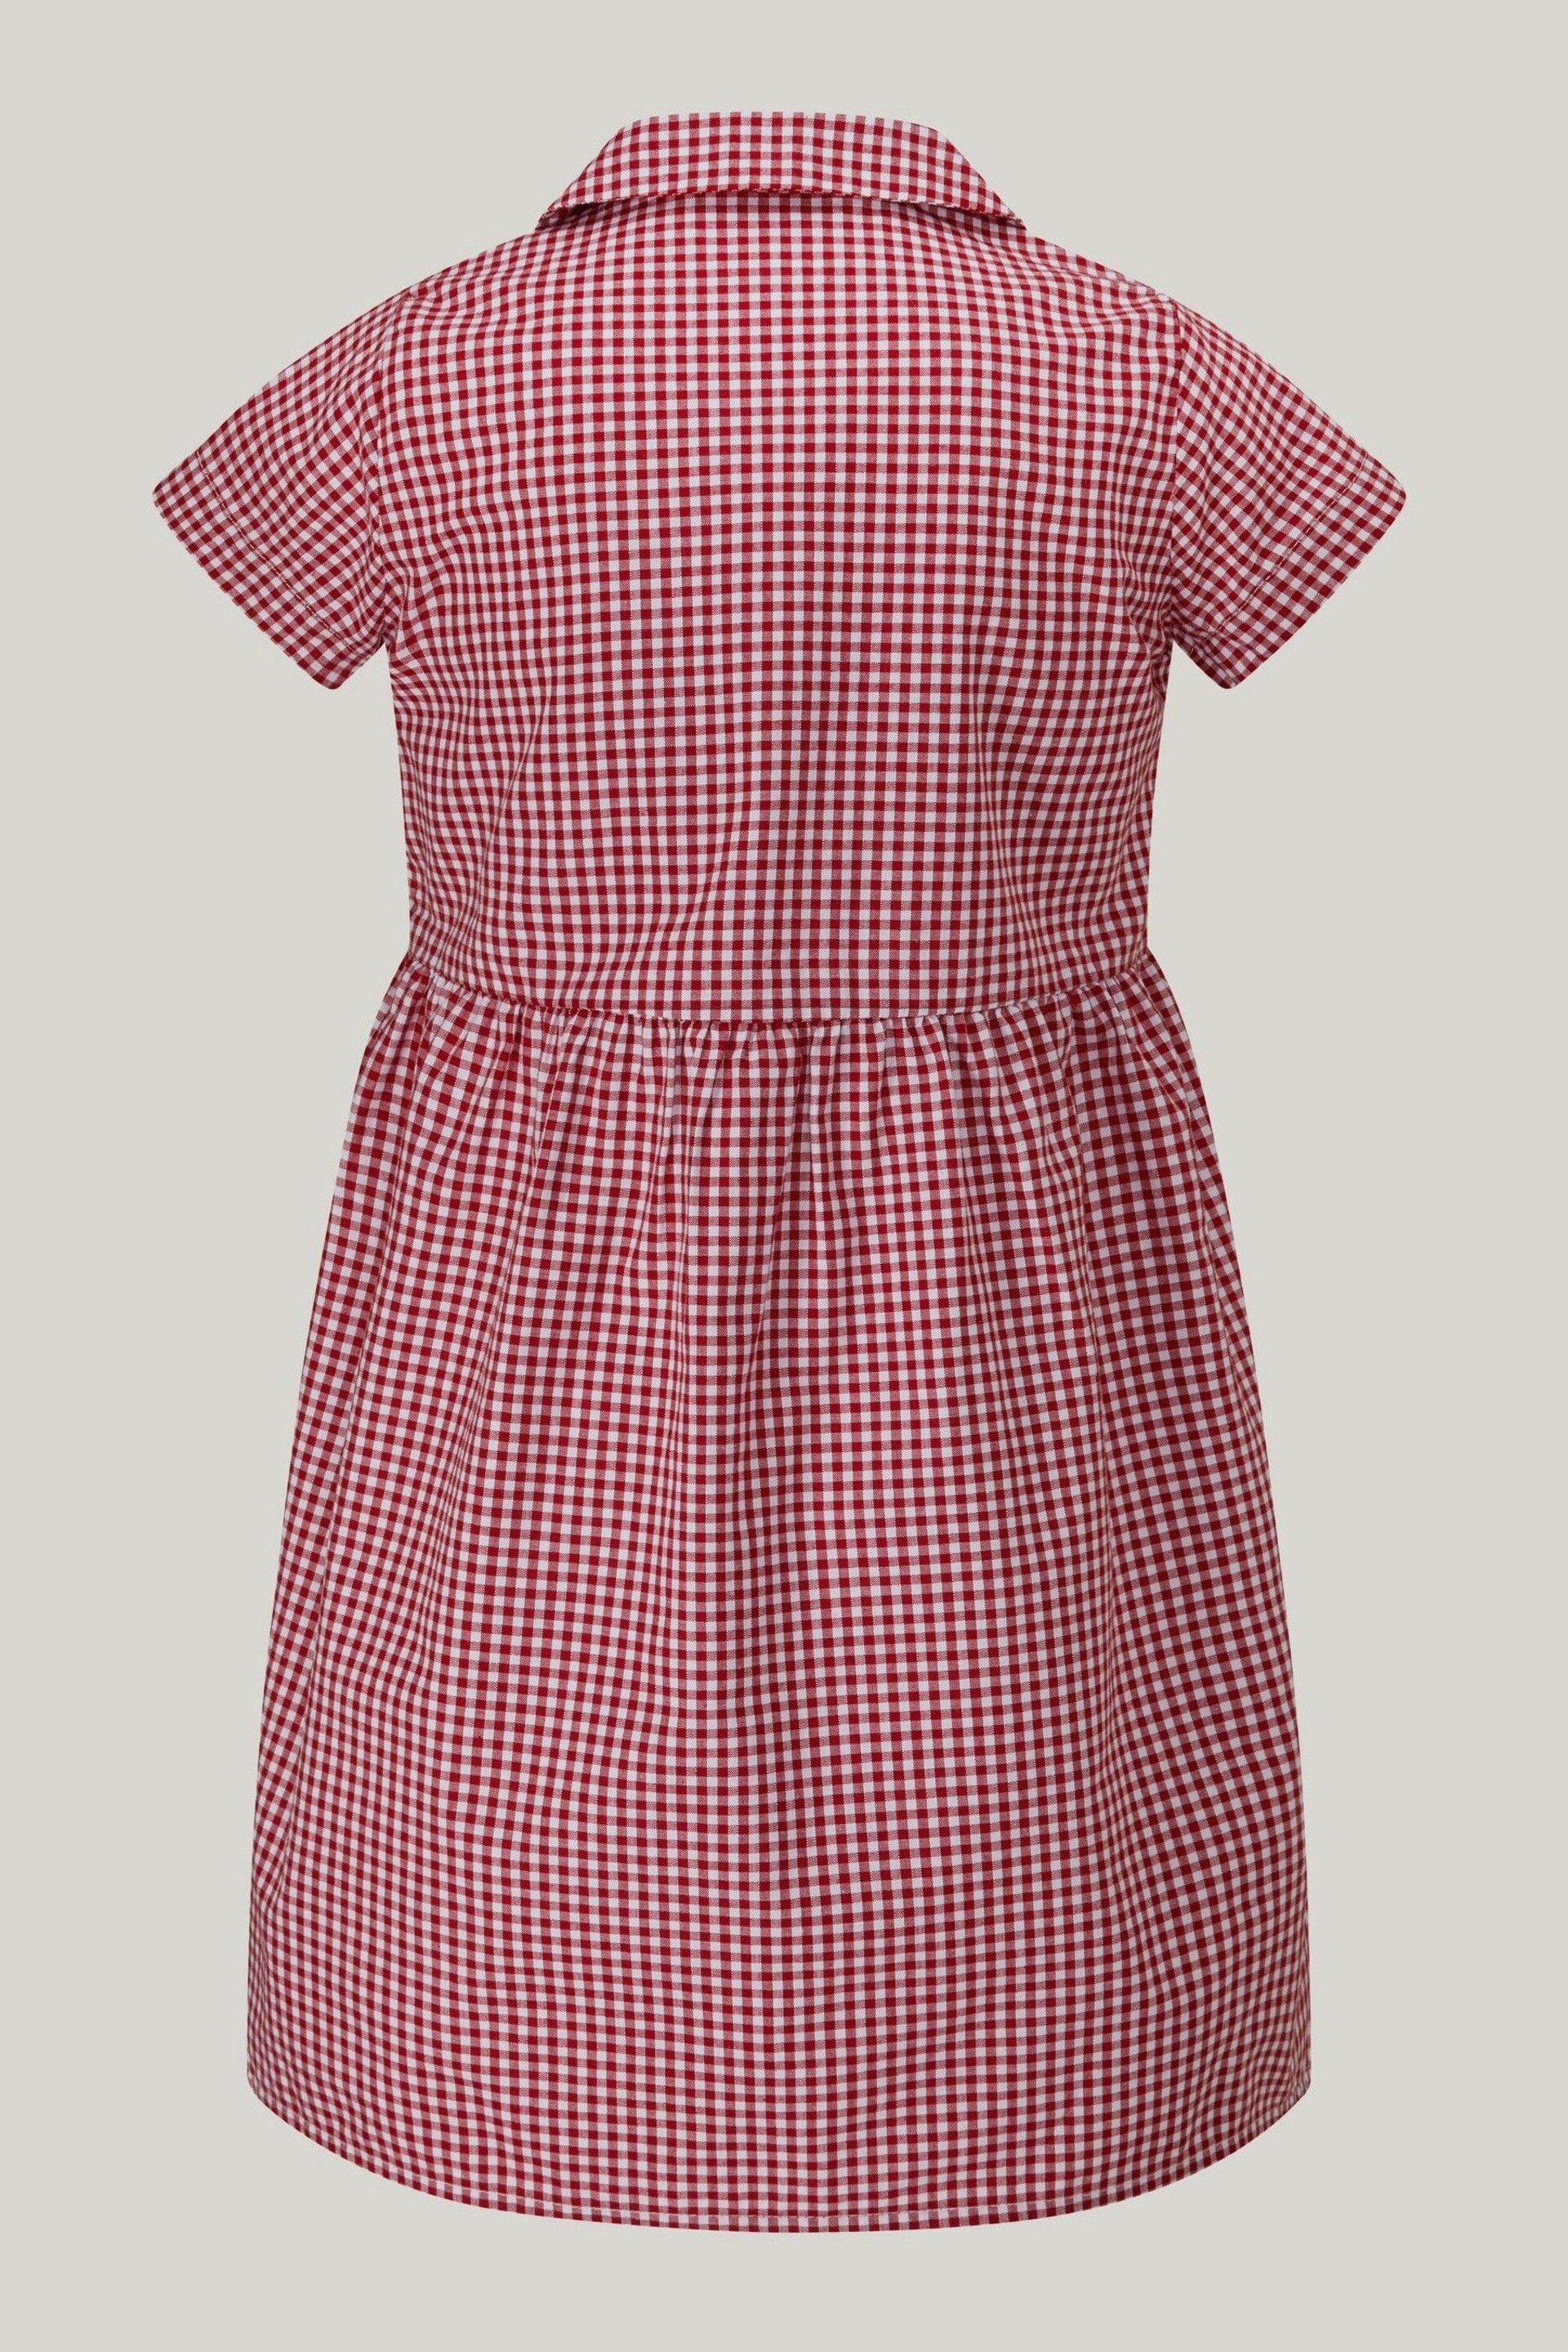 Trutex Red Gingham 2 Pack Button Front School Summer Dress - Image 6 of 6